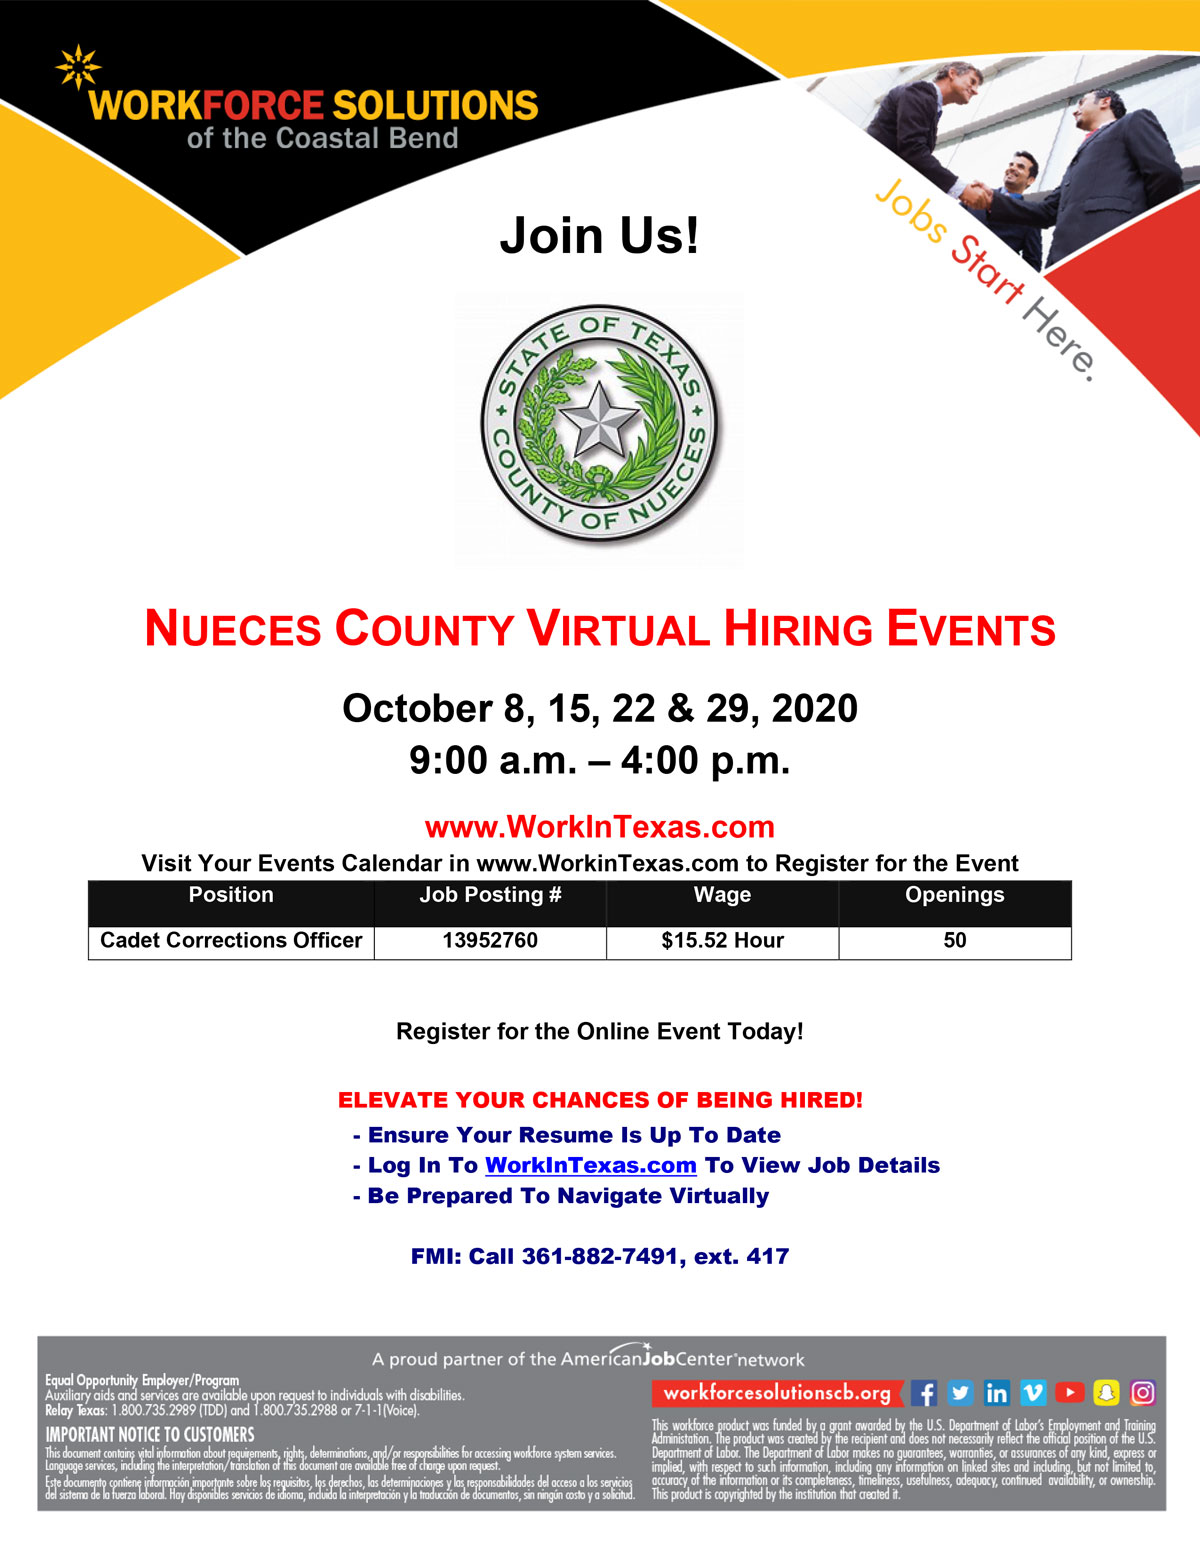 Nueces County Virtual Hiring Events. October 8th, 15th, 22nd & 29th, 2020 from 9:00 A.M. - 4:00 P.M. Register at www.workintexas.com using job posting number 13952760. There are 50 job openings for the position cadet corrections officer. 